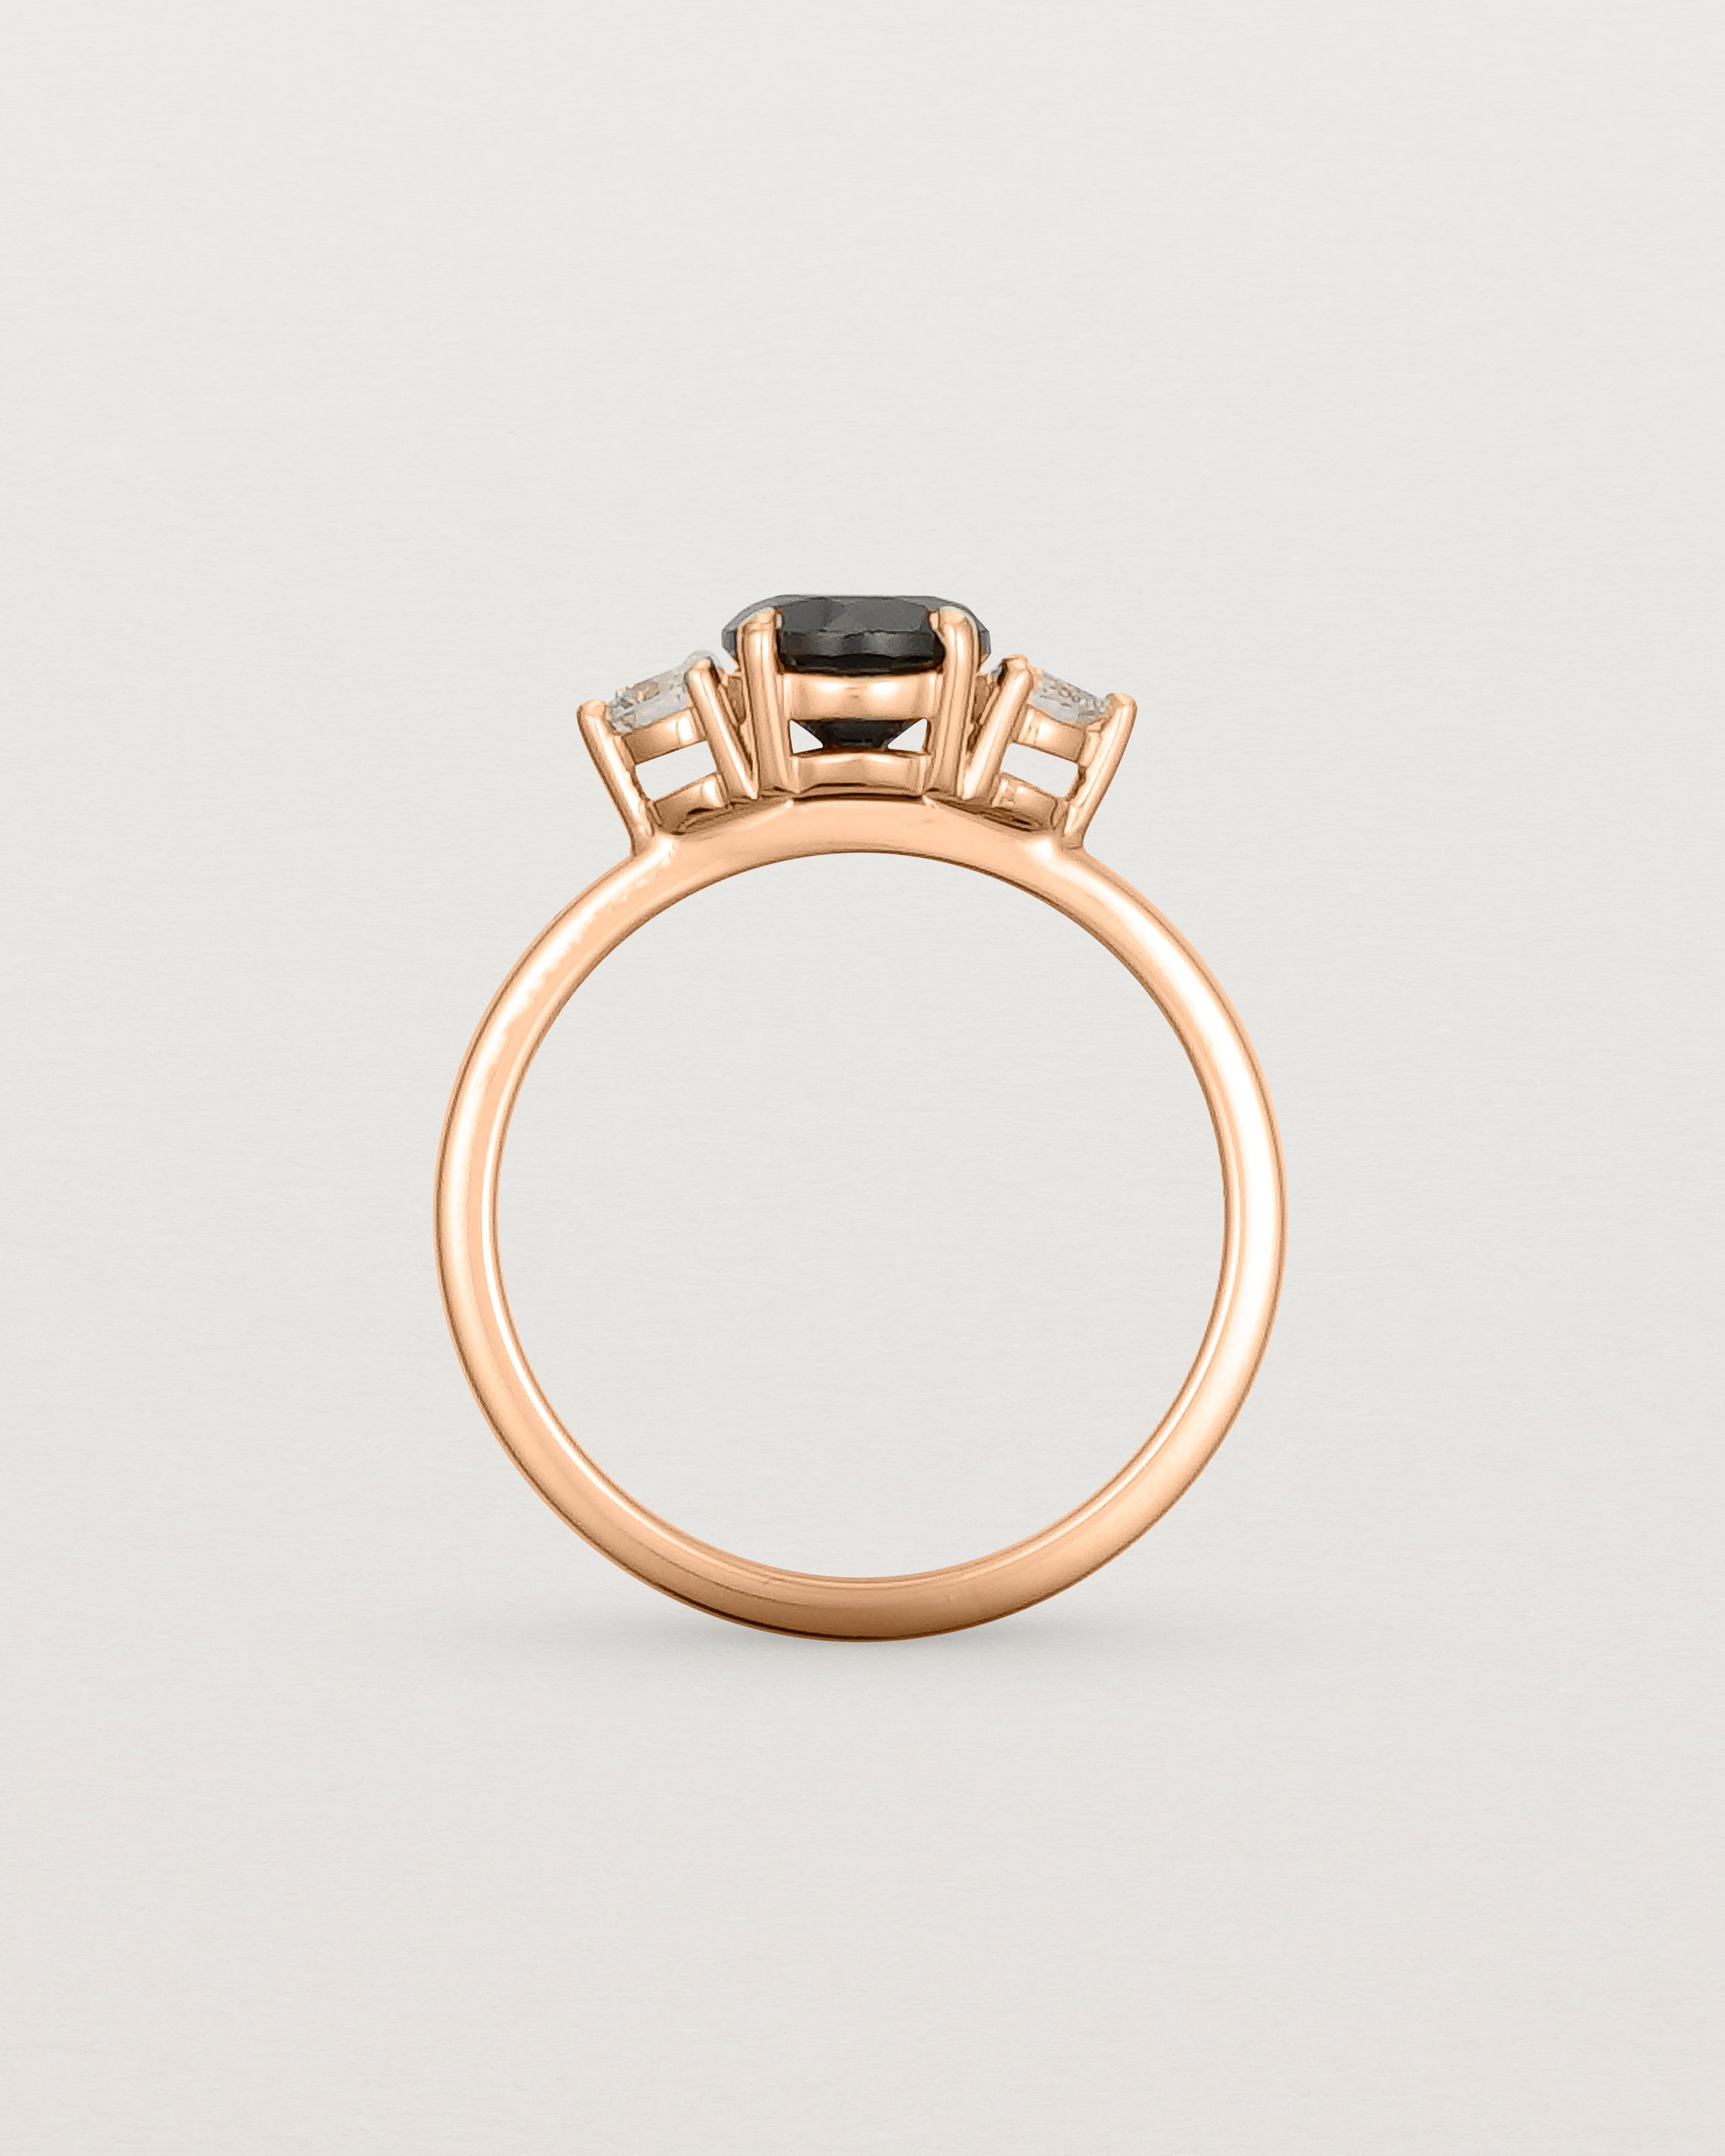 Standing view of the Petite Una Round Trio Ring | Black Spinel & Diamonds | Rose Gold.